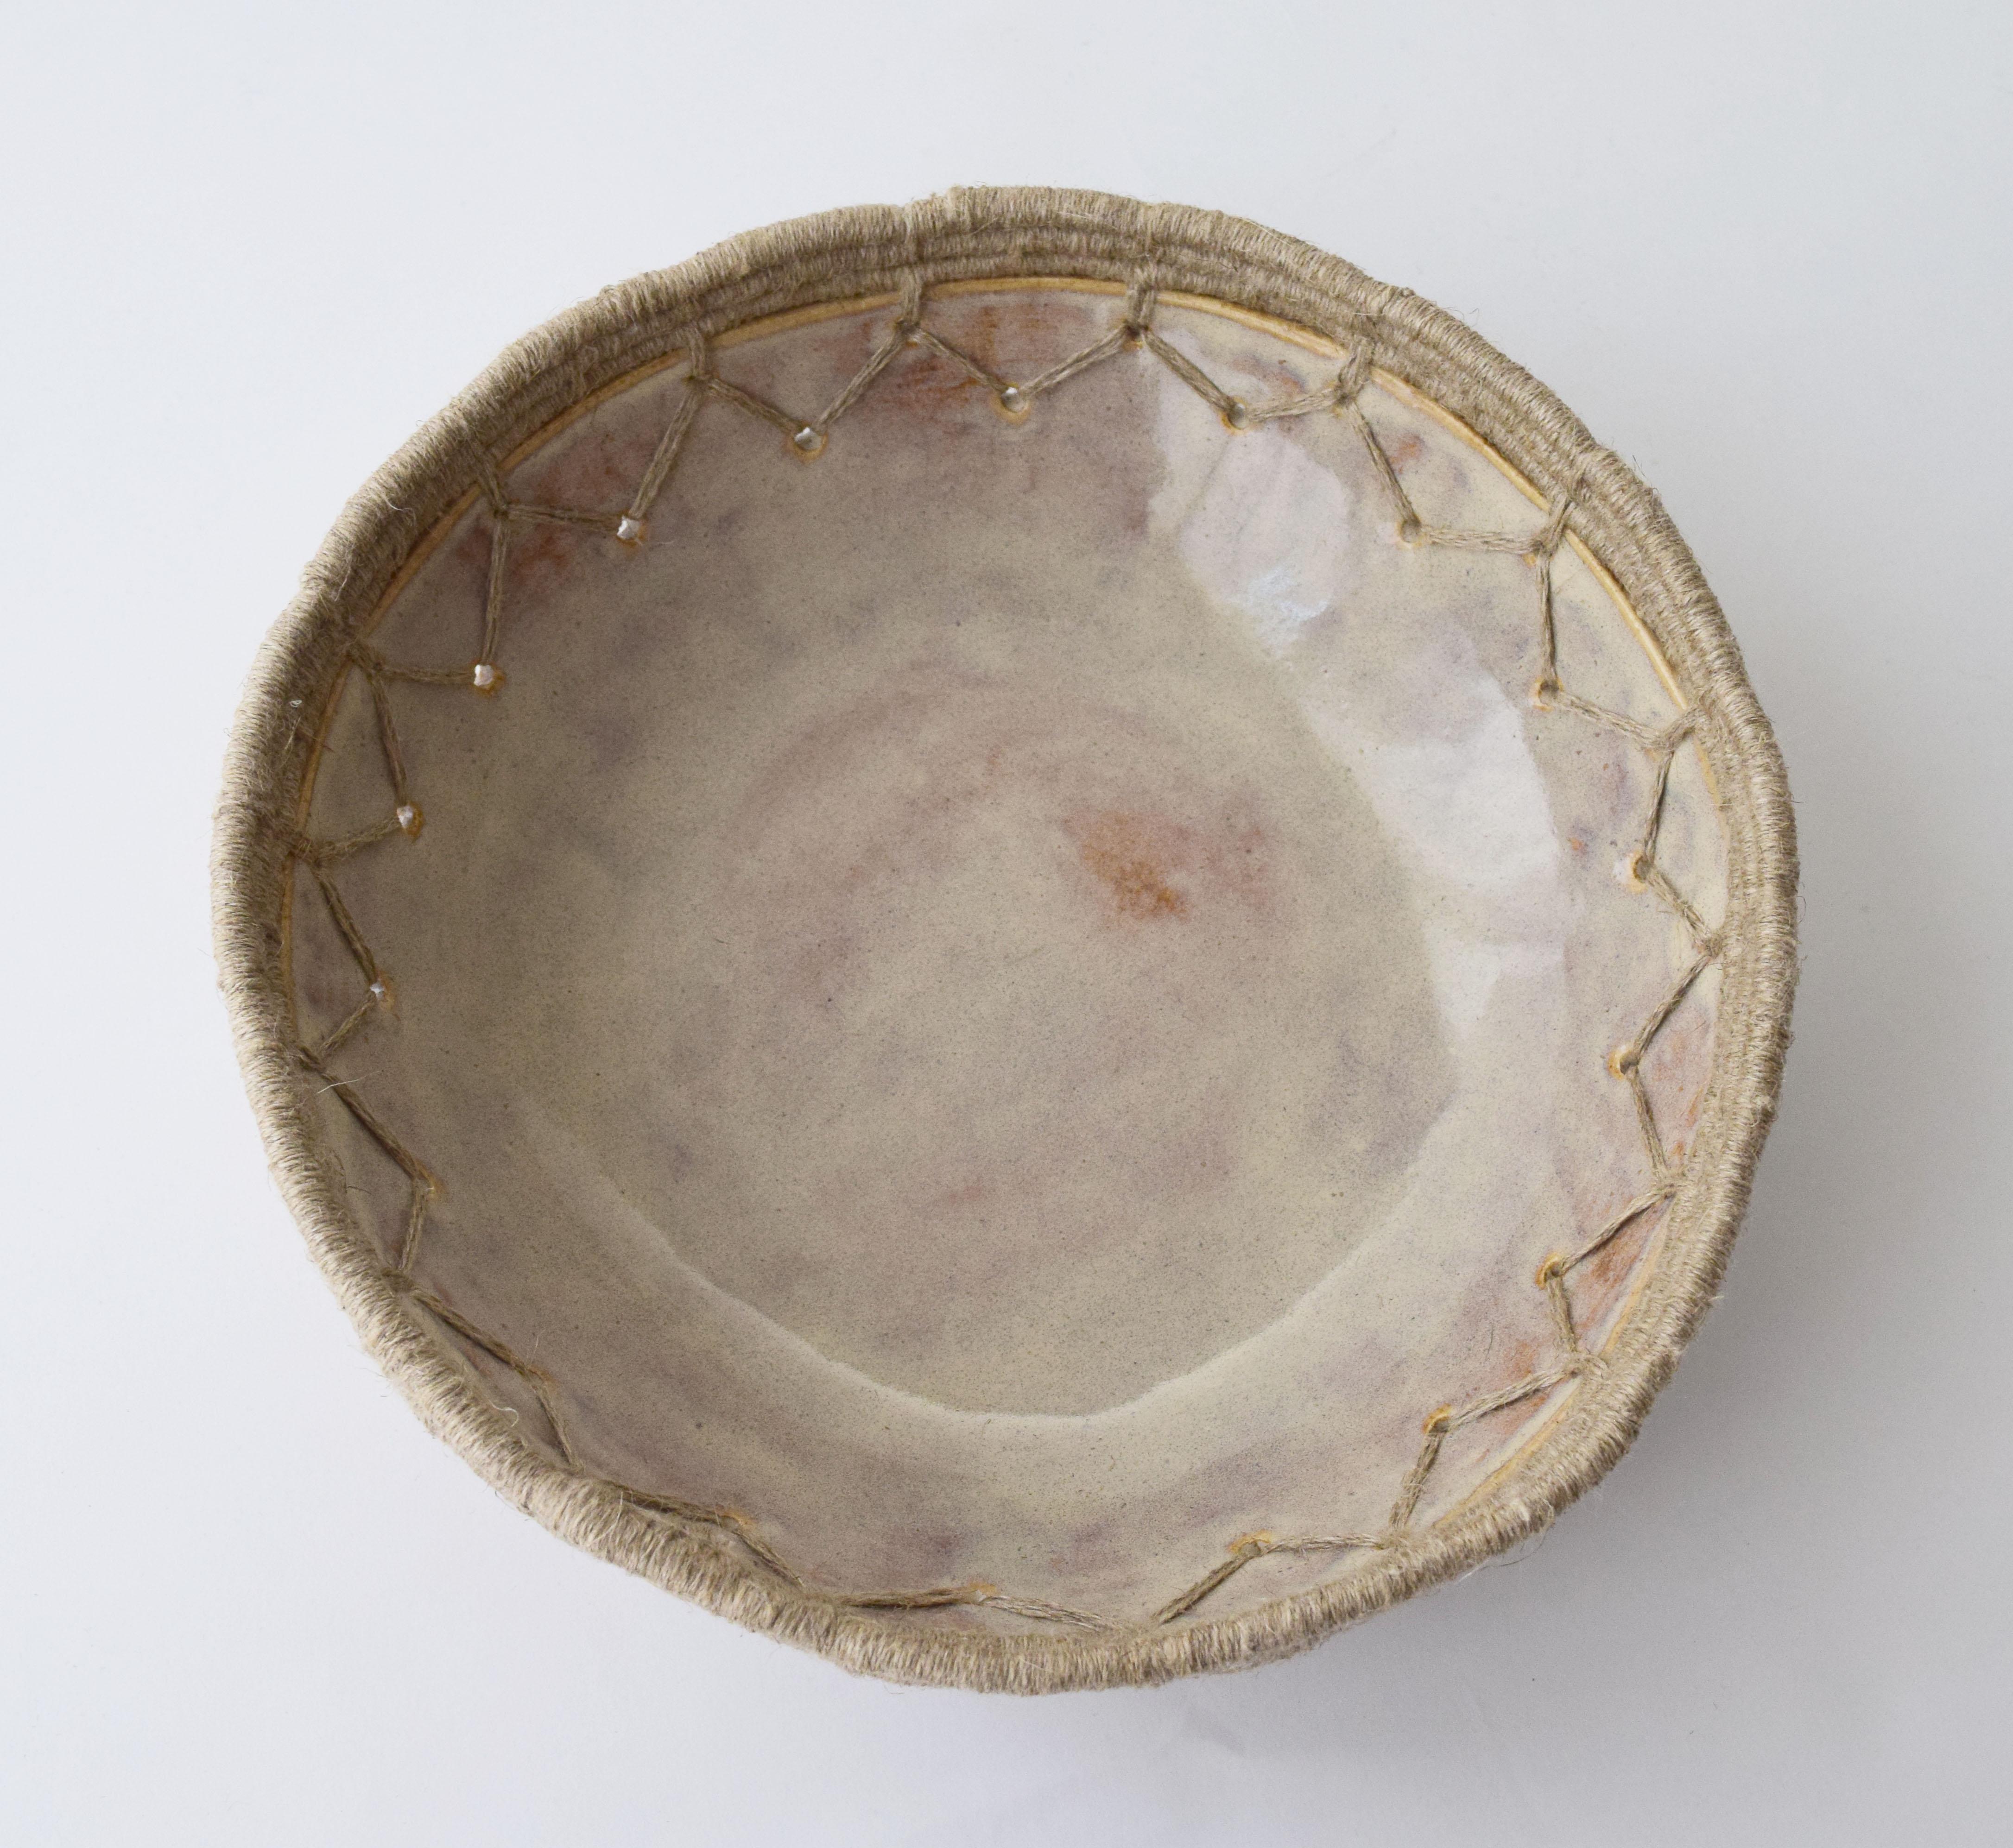 Hand-Crafted Decorative Bowl #642 in Gray with Woven Natural Linen Edge Detail